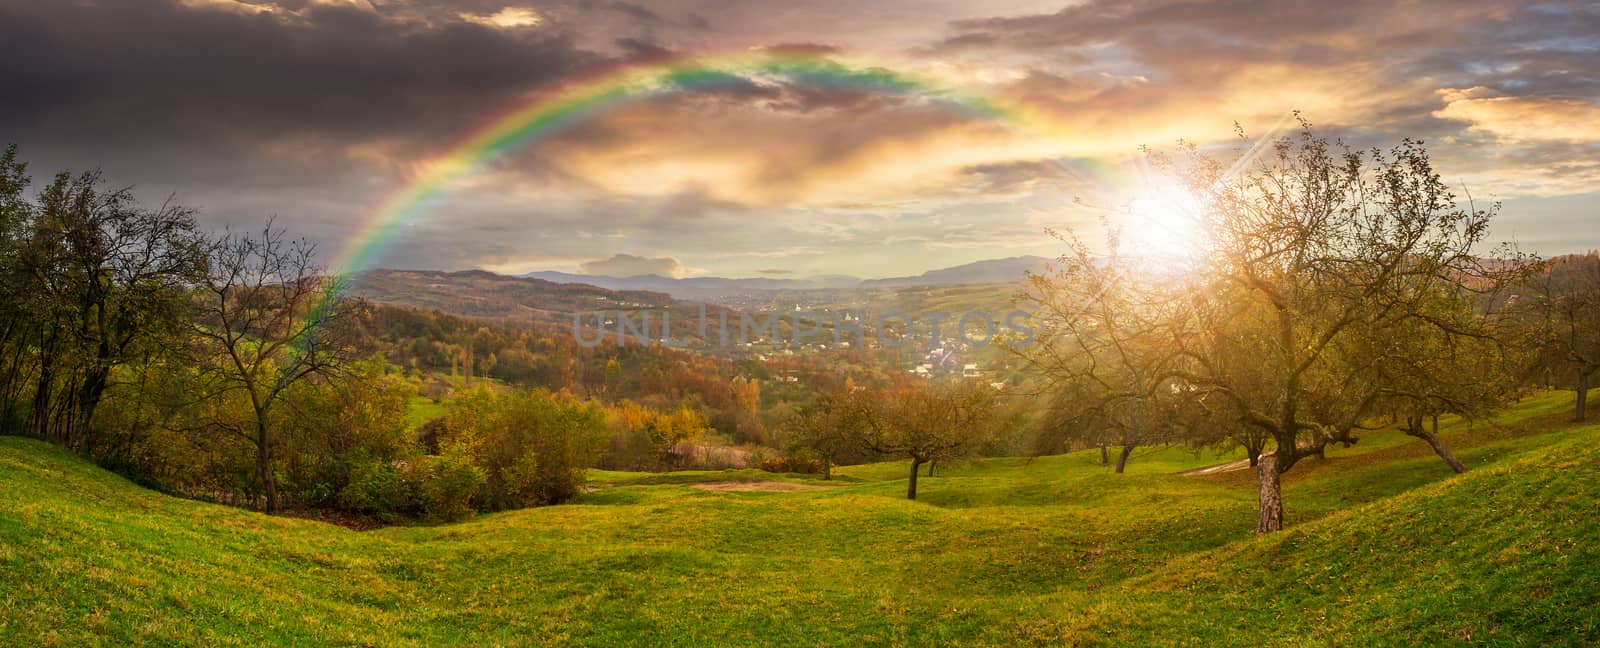 panorama of apple orchard on hillside at sunset by Pellinni